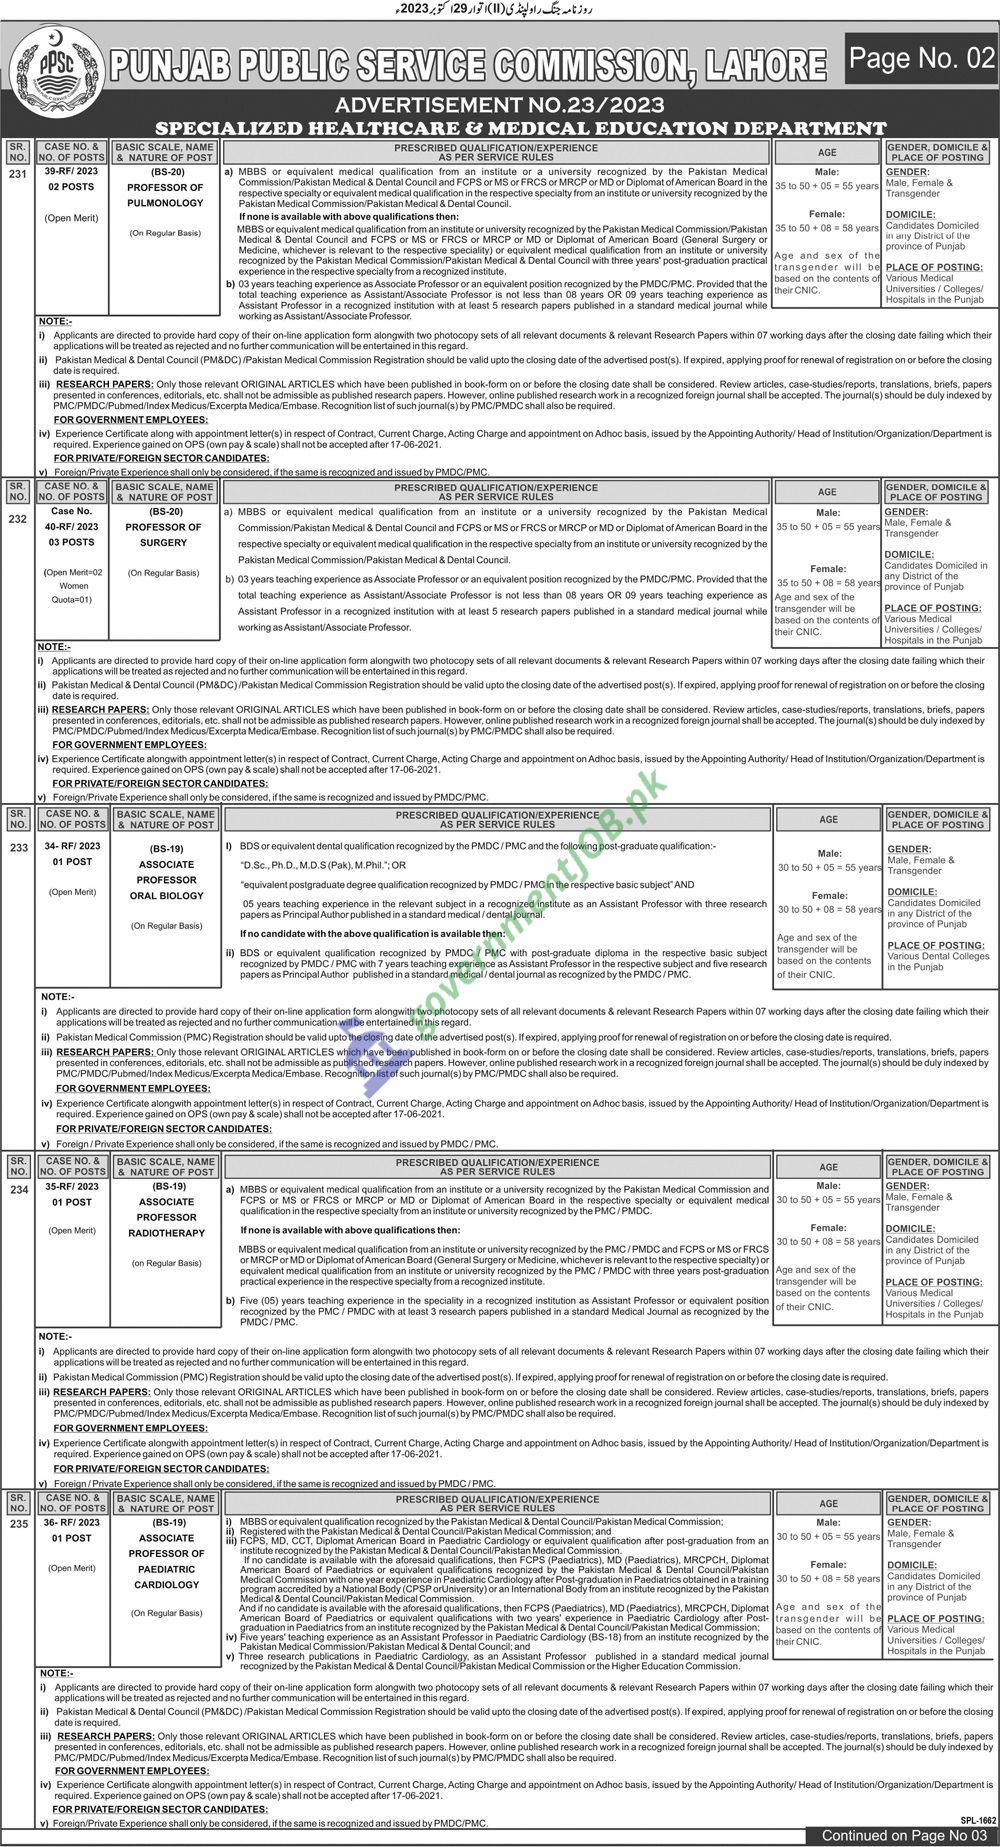 PPSC Jobs ad no 23-2023 page 2